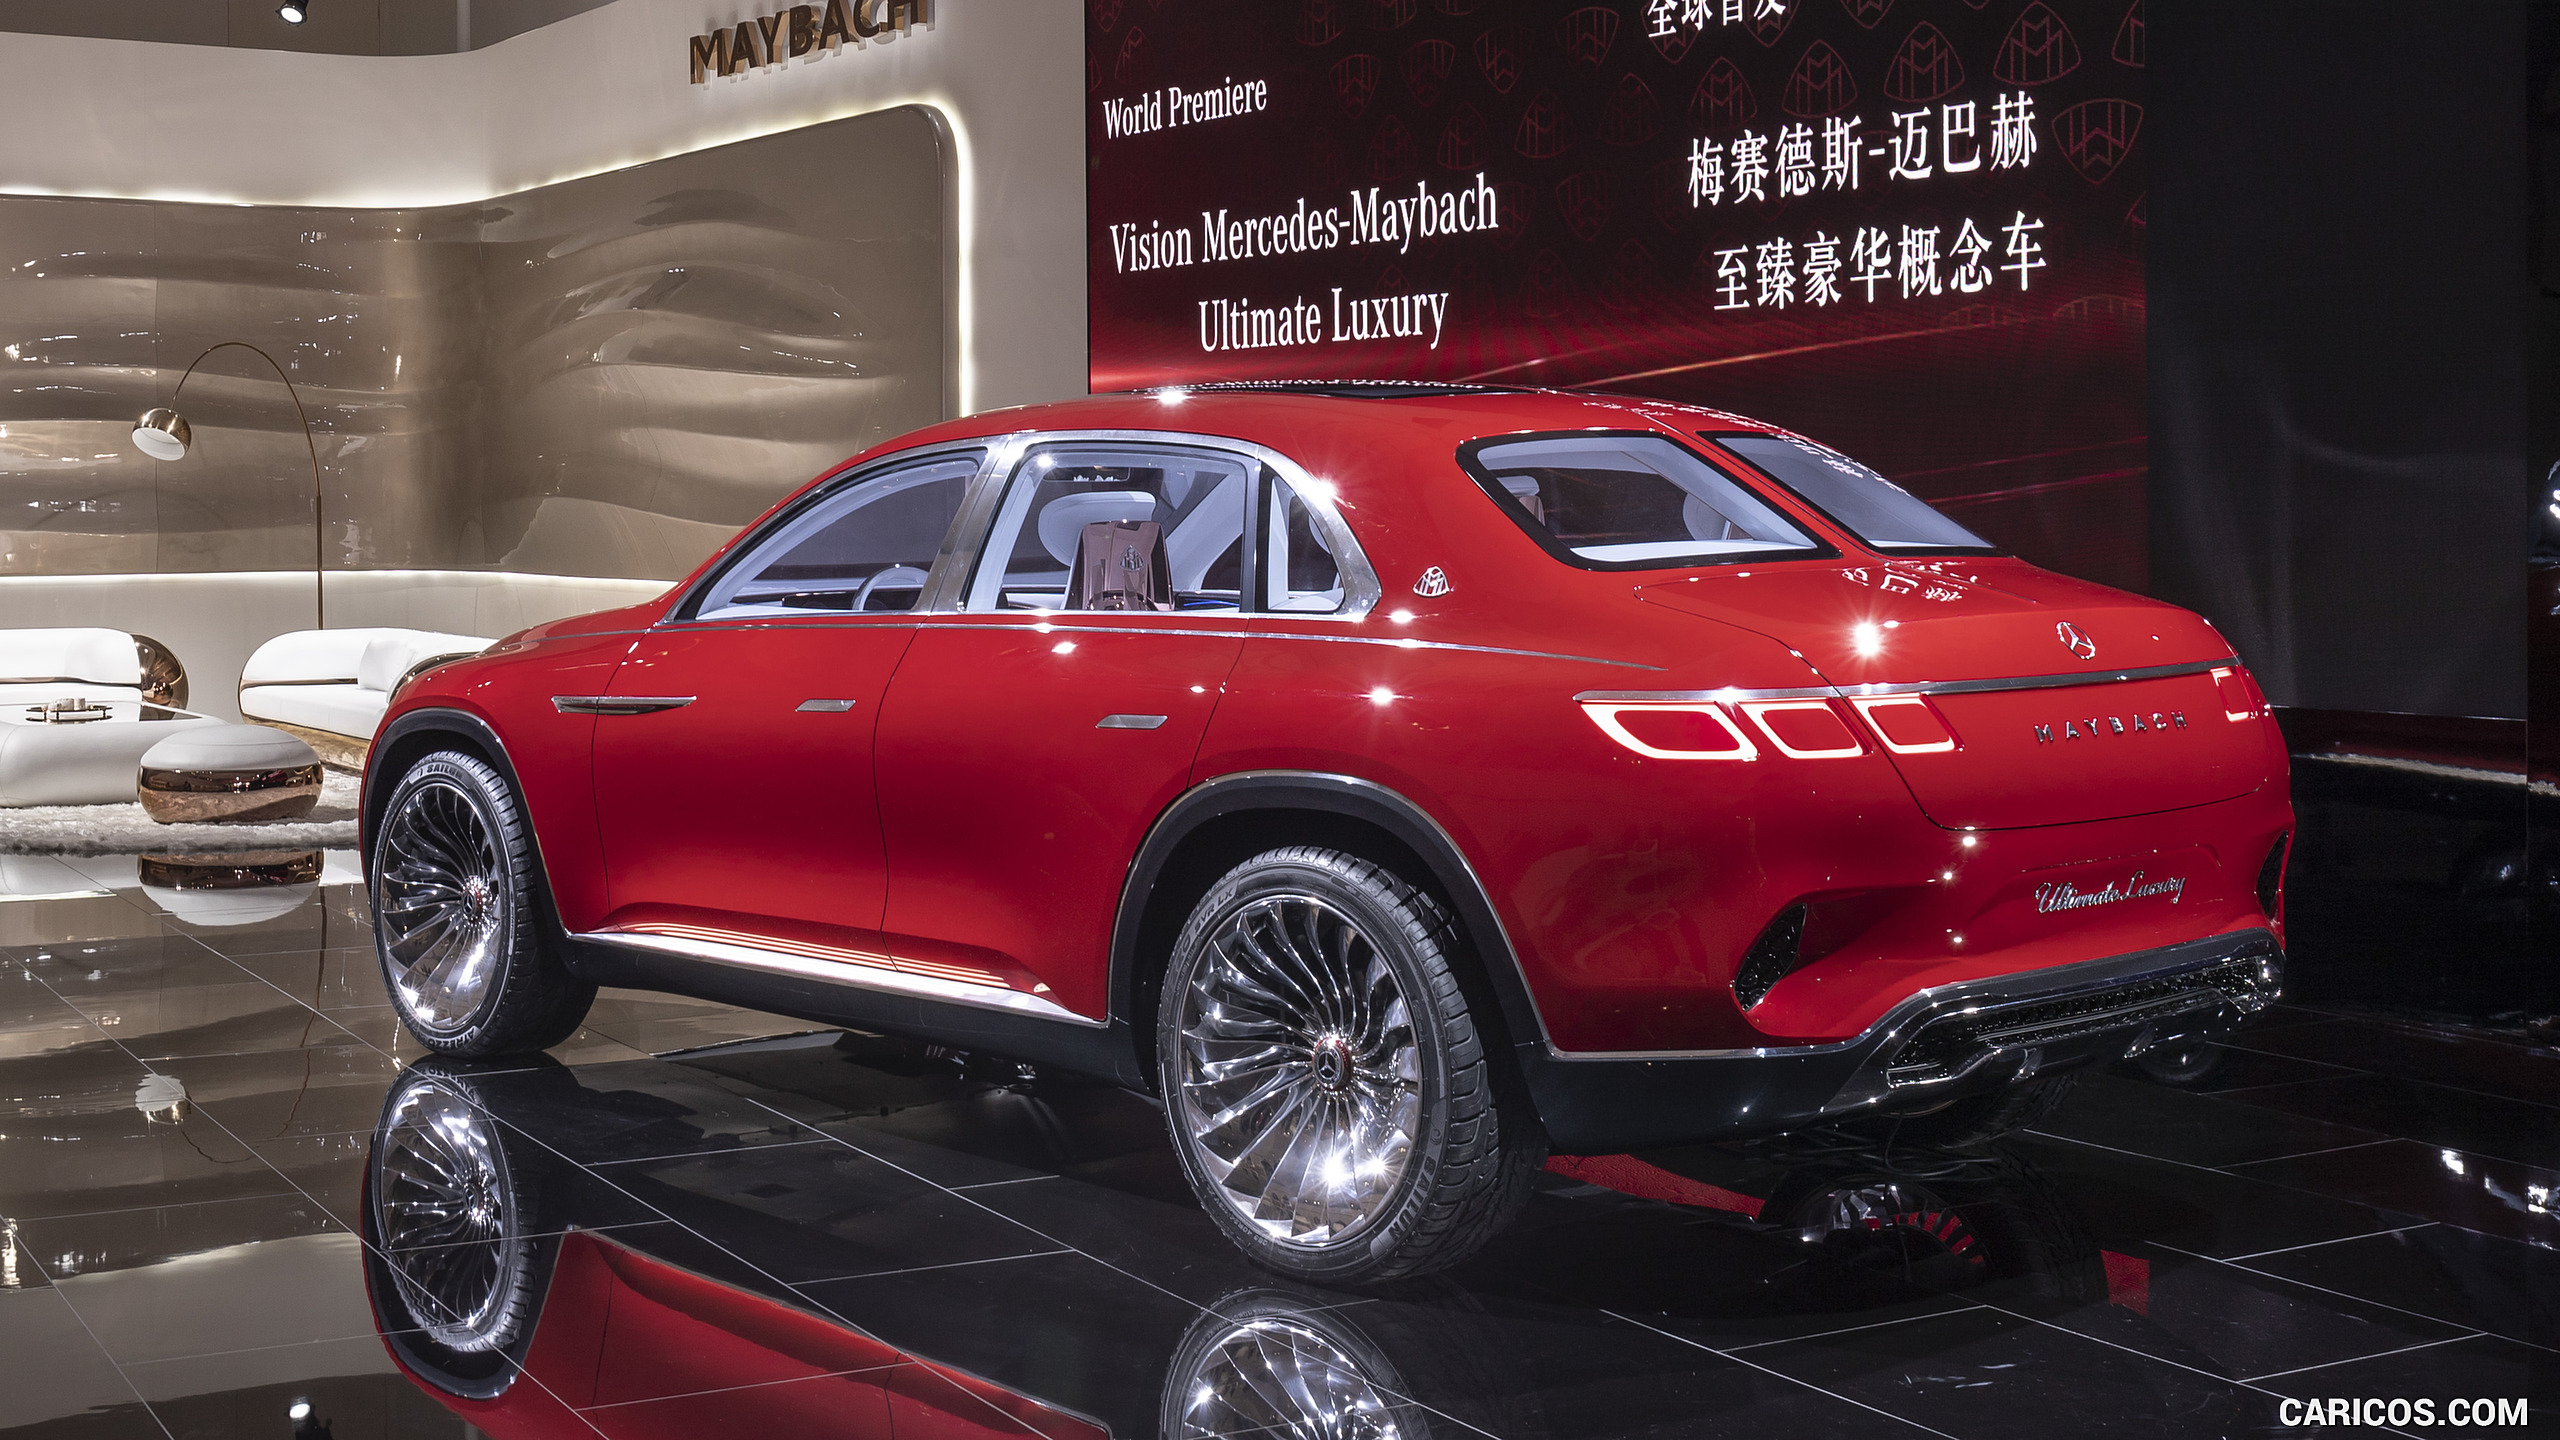 2018 Mercedes-Maybach Vision Ultimate Luxury SUV Concept - Rear Three-Quarter, #10 of 41